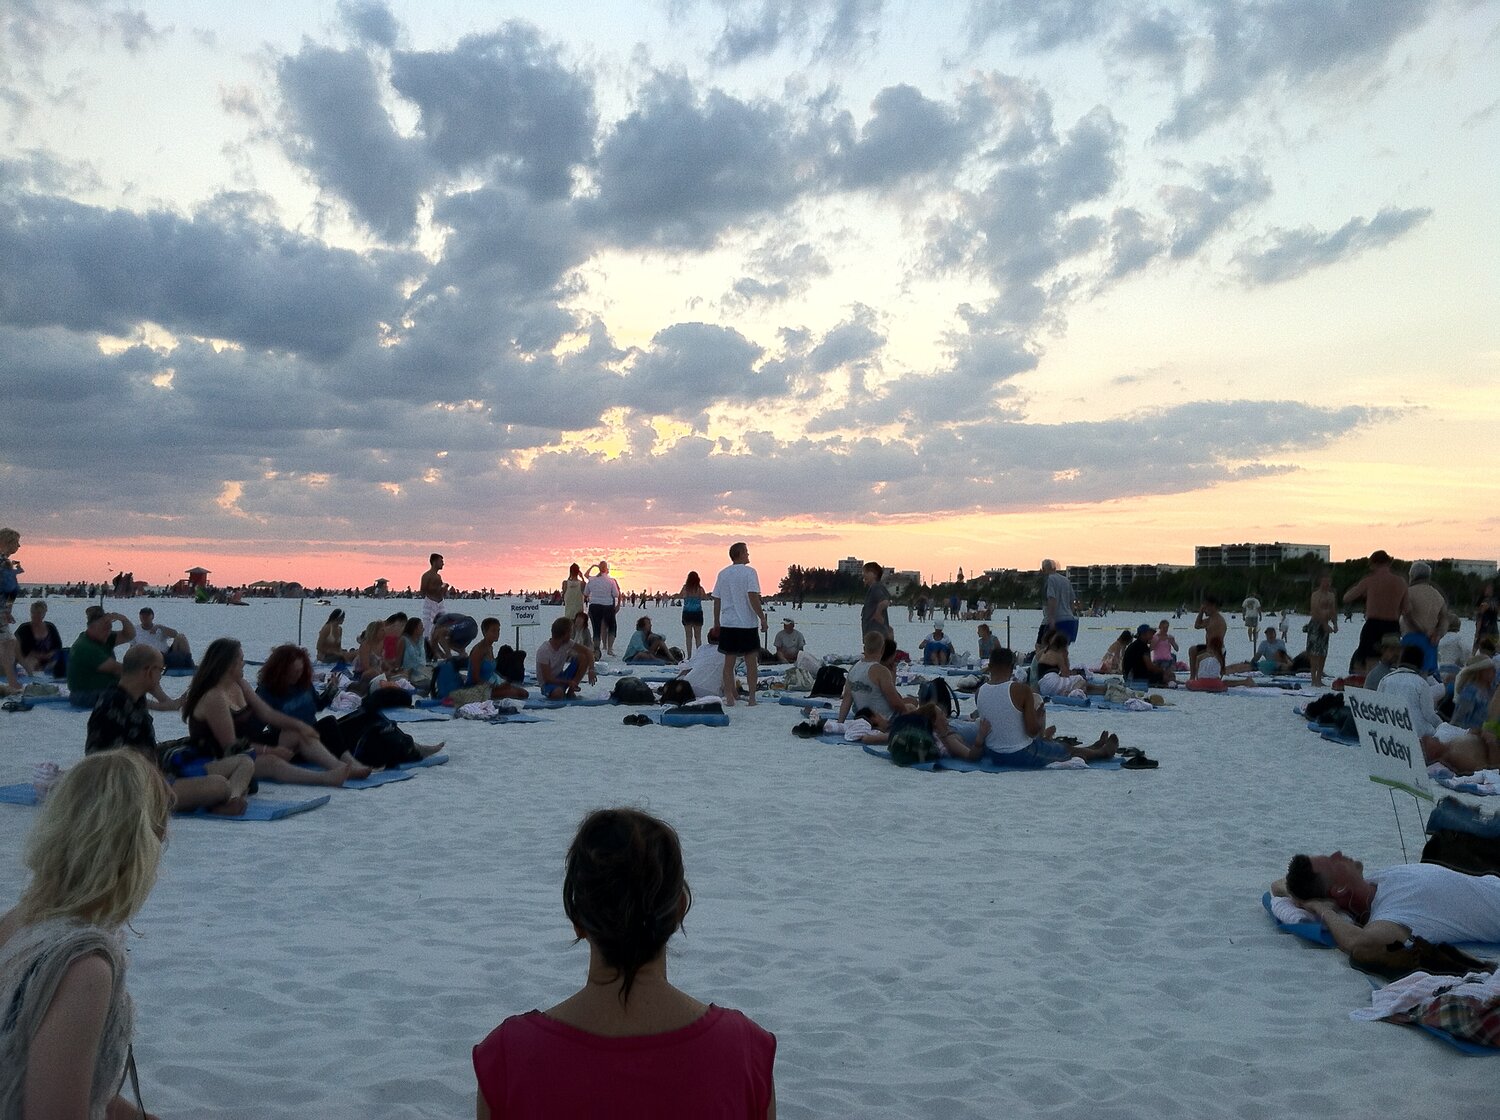 I was often part of group beach events from 2009-2014 where we meditated and followed leader, Ashayana/E’Asha’s, energy work rituals and ceremonies on Siesta Key Beach.